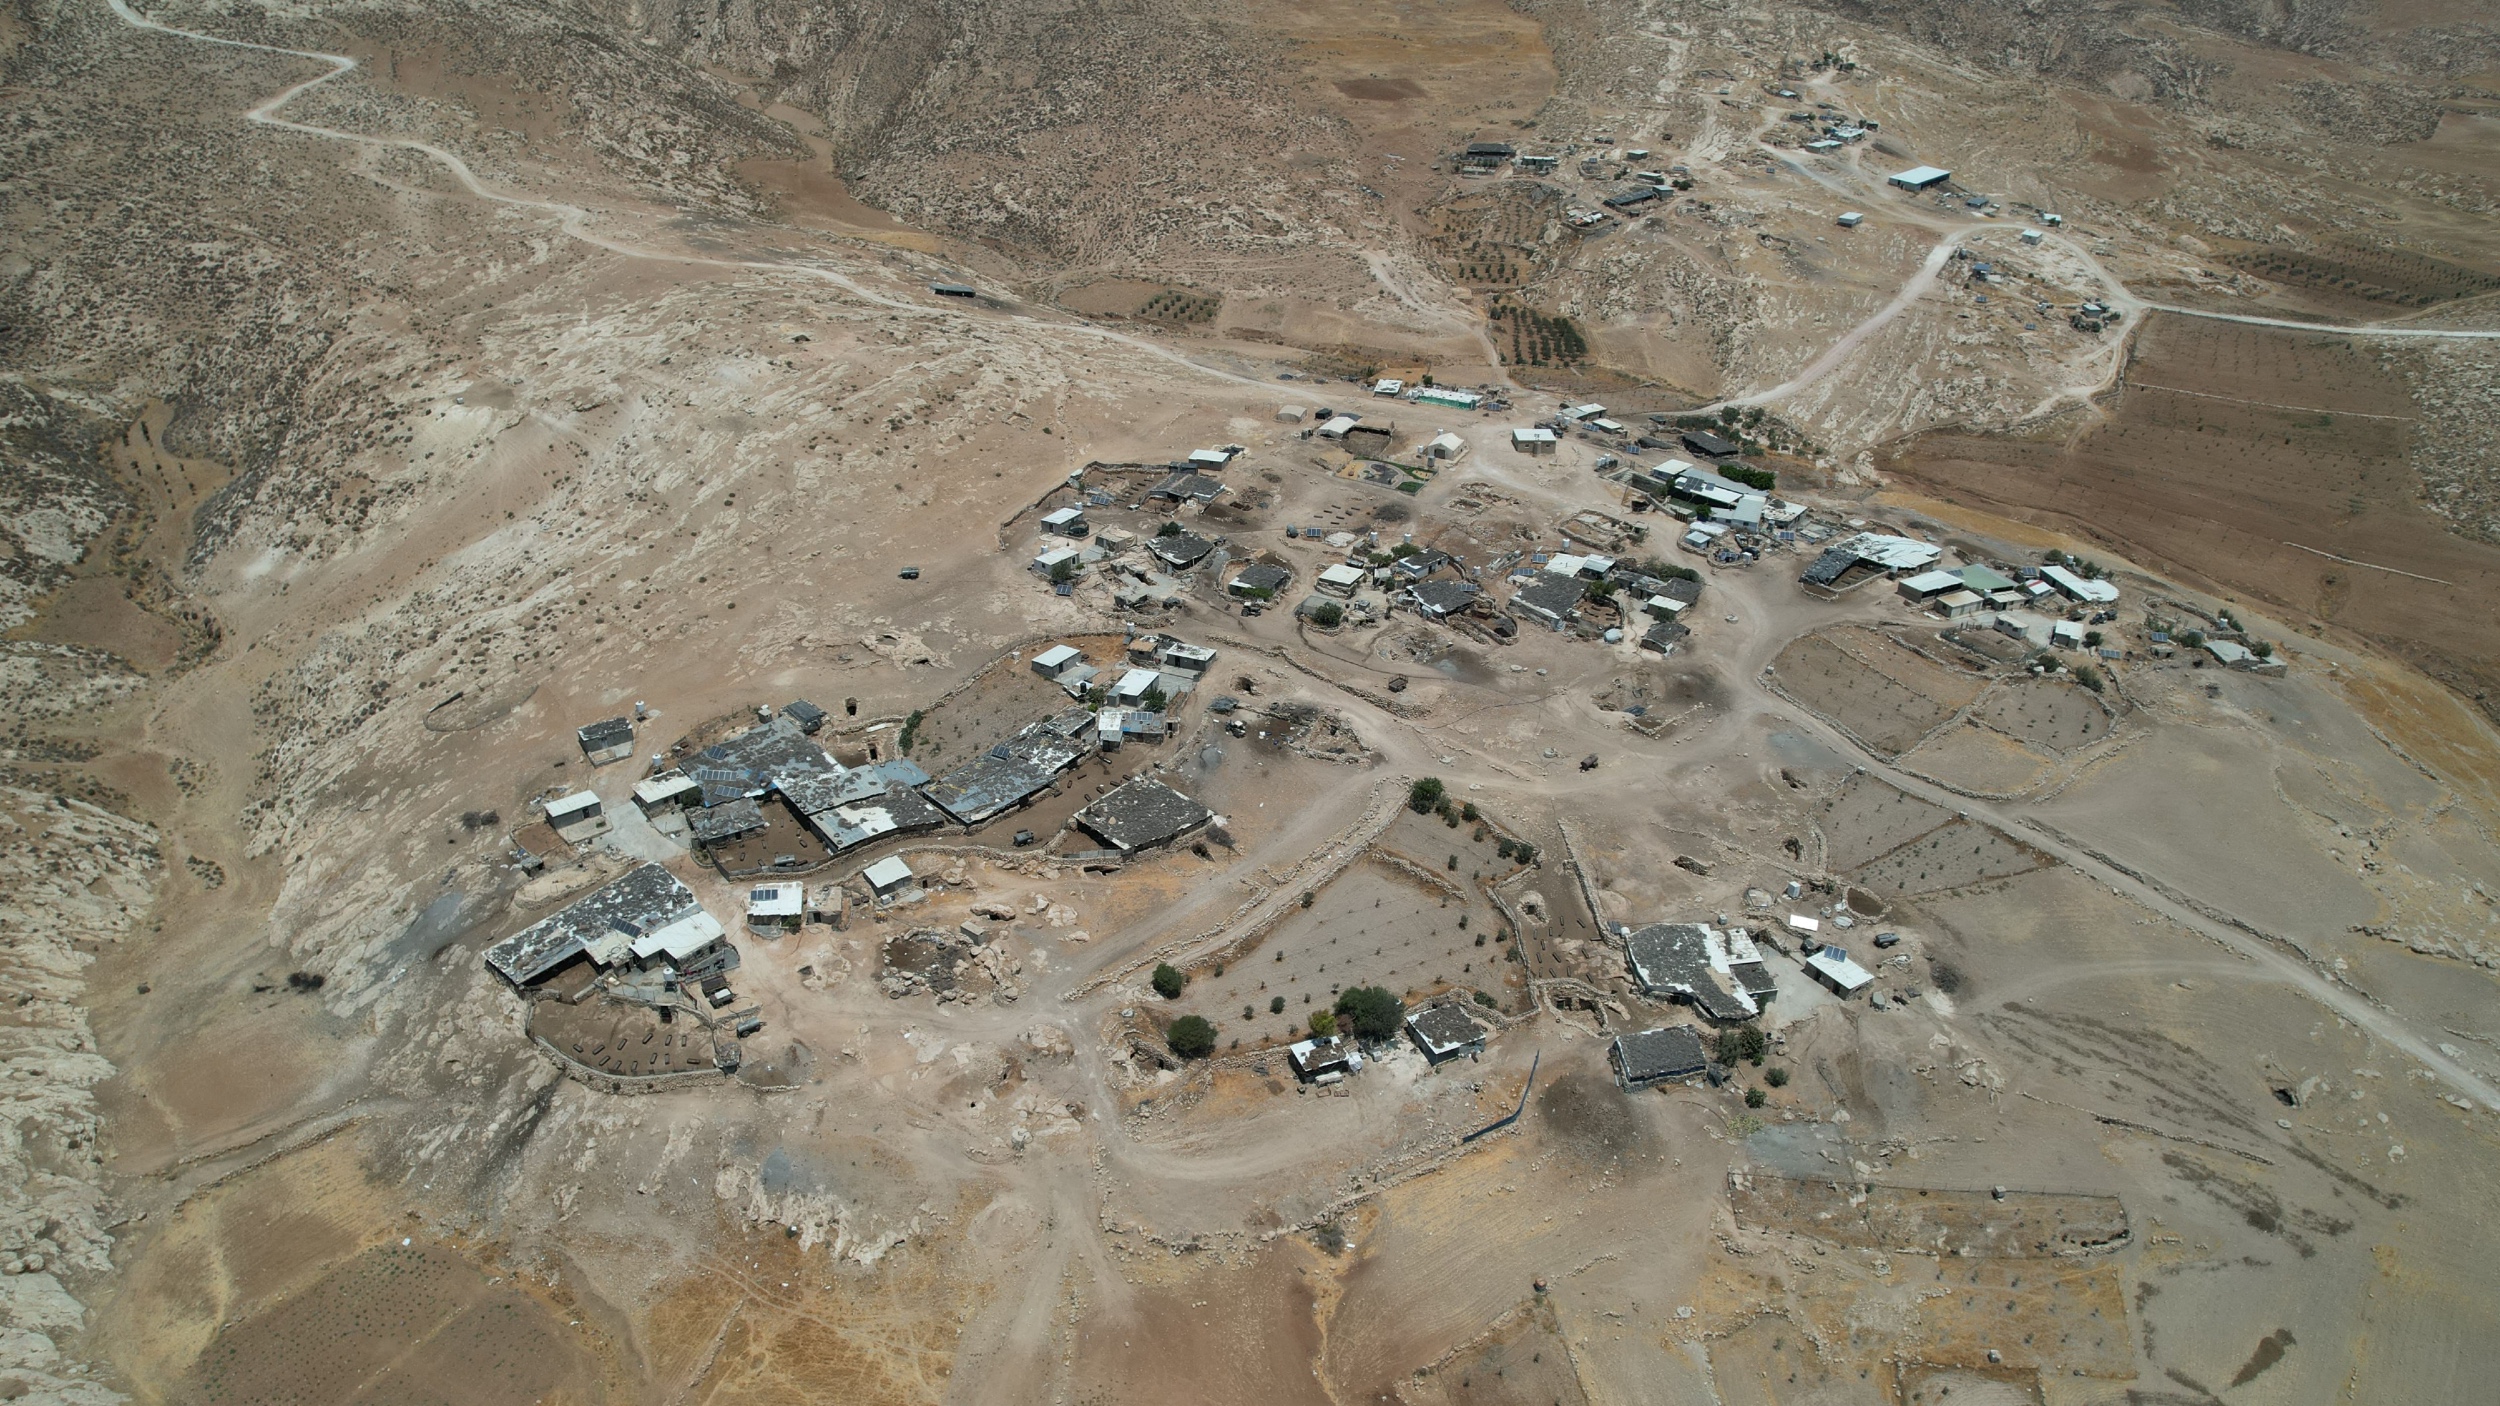 An aerial view of Jabra village south of Hebron in the occupied West Bank taken on 11 June 2022. (MEE/Hisham Abu Shaqrah)